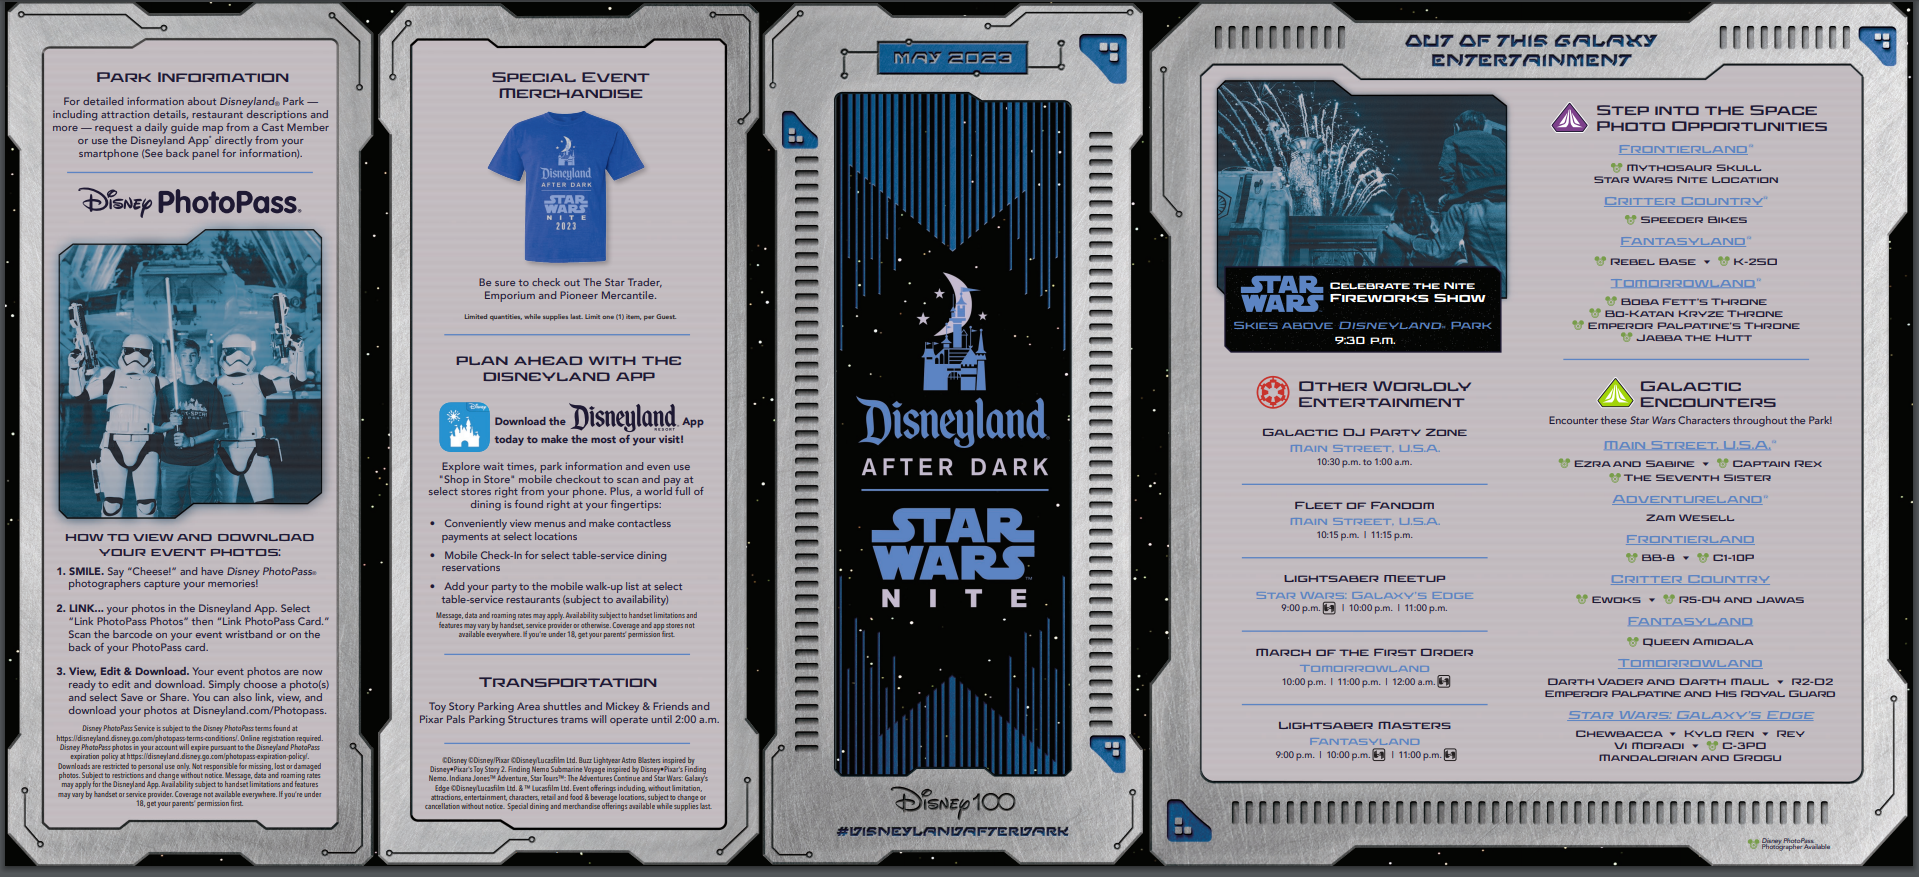 Disneyland Star Wars Nite 2023 returns this May! The special event tak